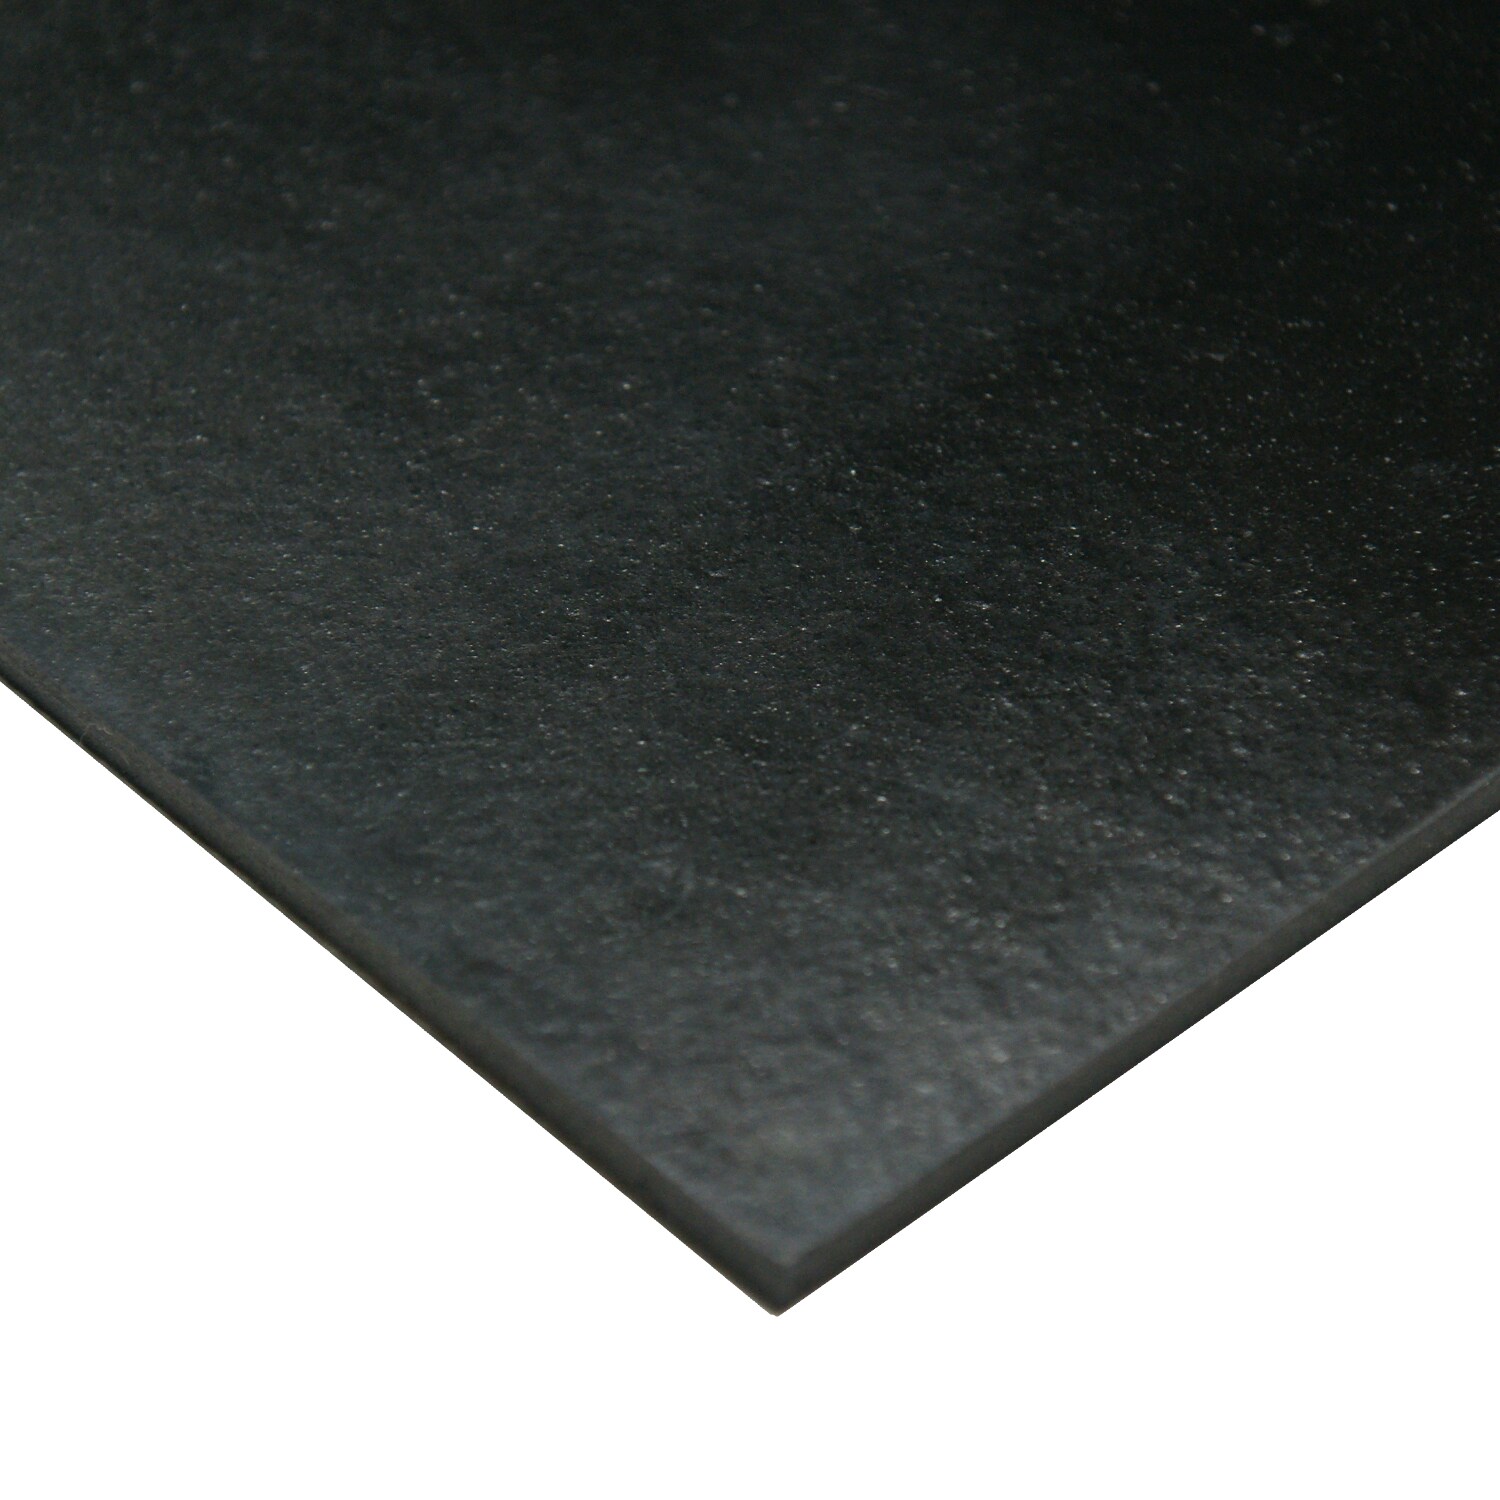 Rubber-Cal Neoprene 1/8-in T x 12-in W x 24-in L Black Commercial 50A  Durometer Rubber Sheet